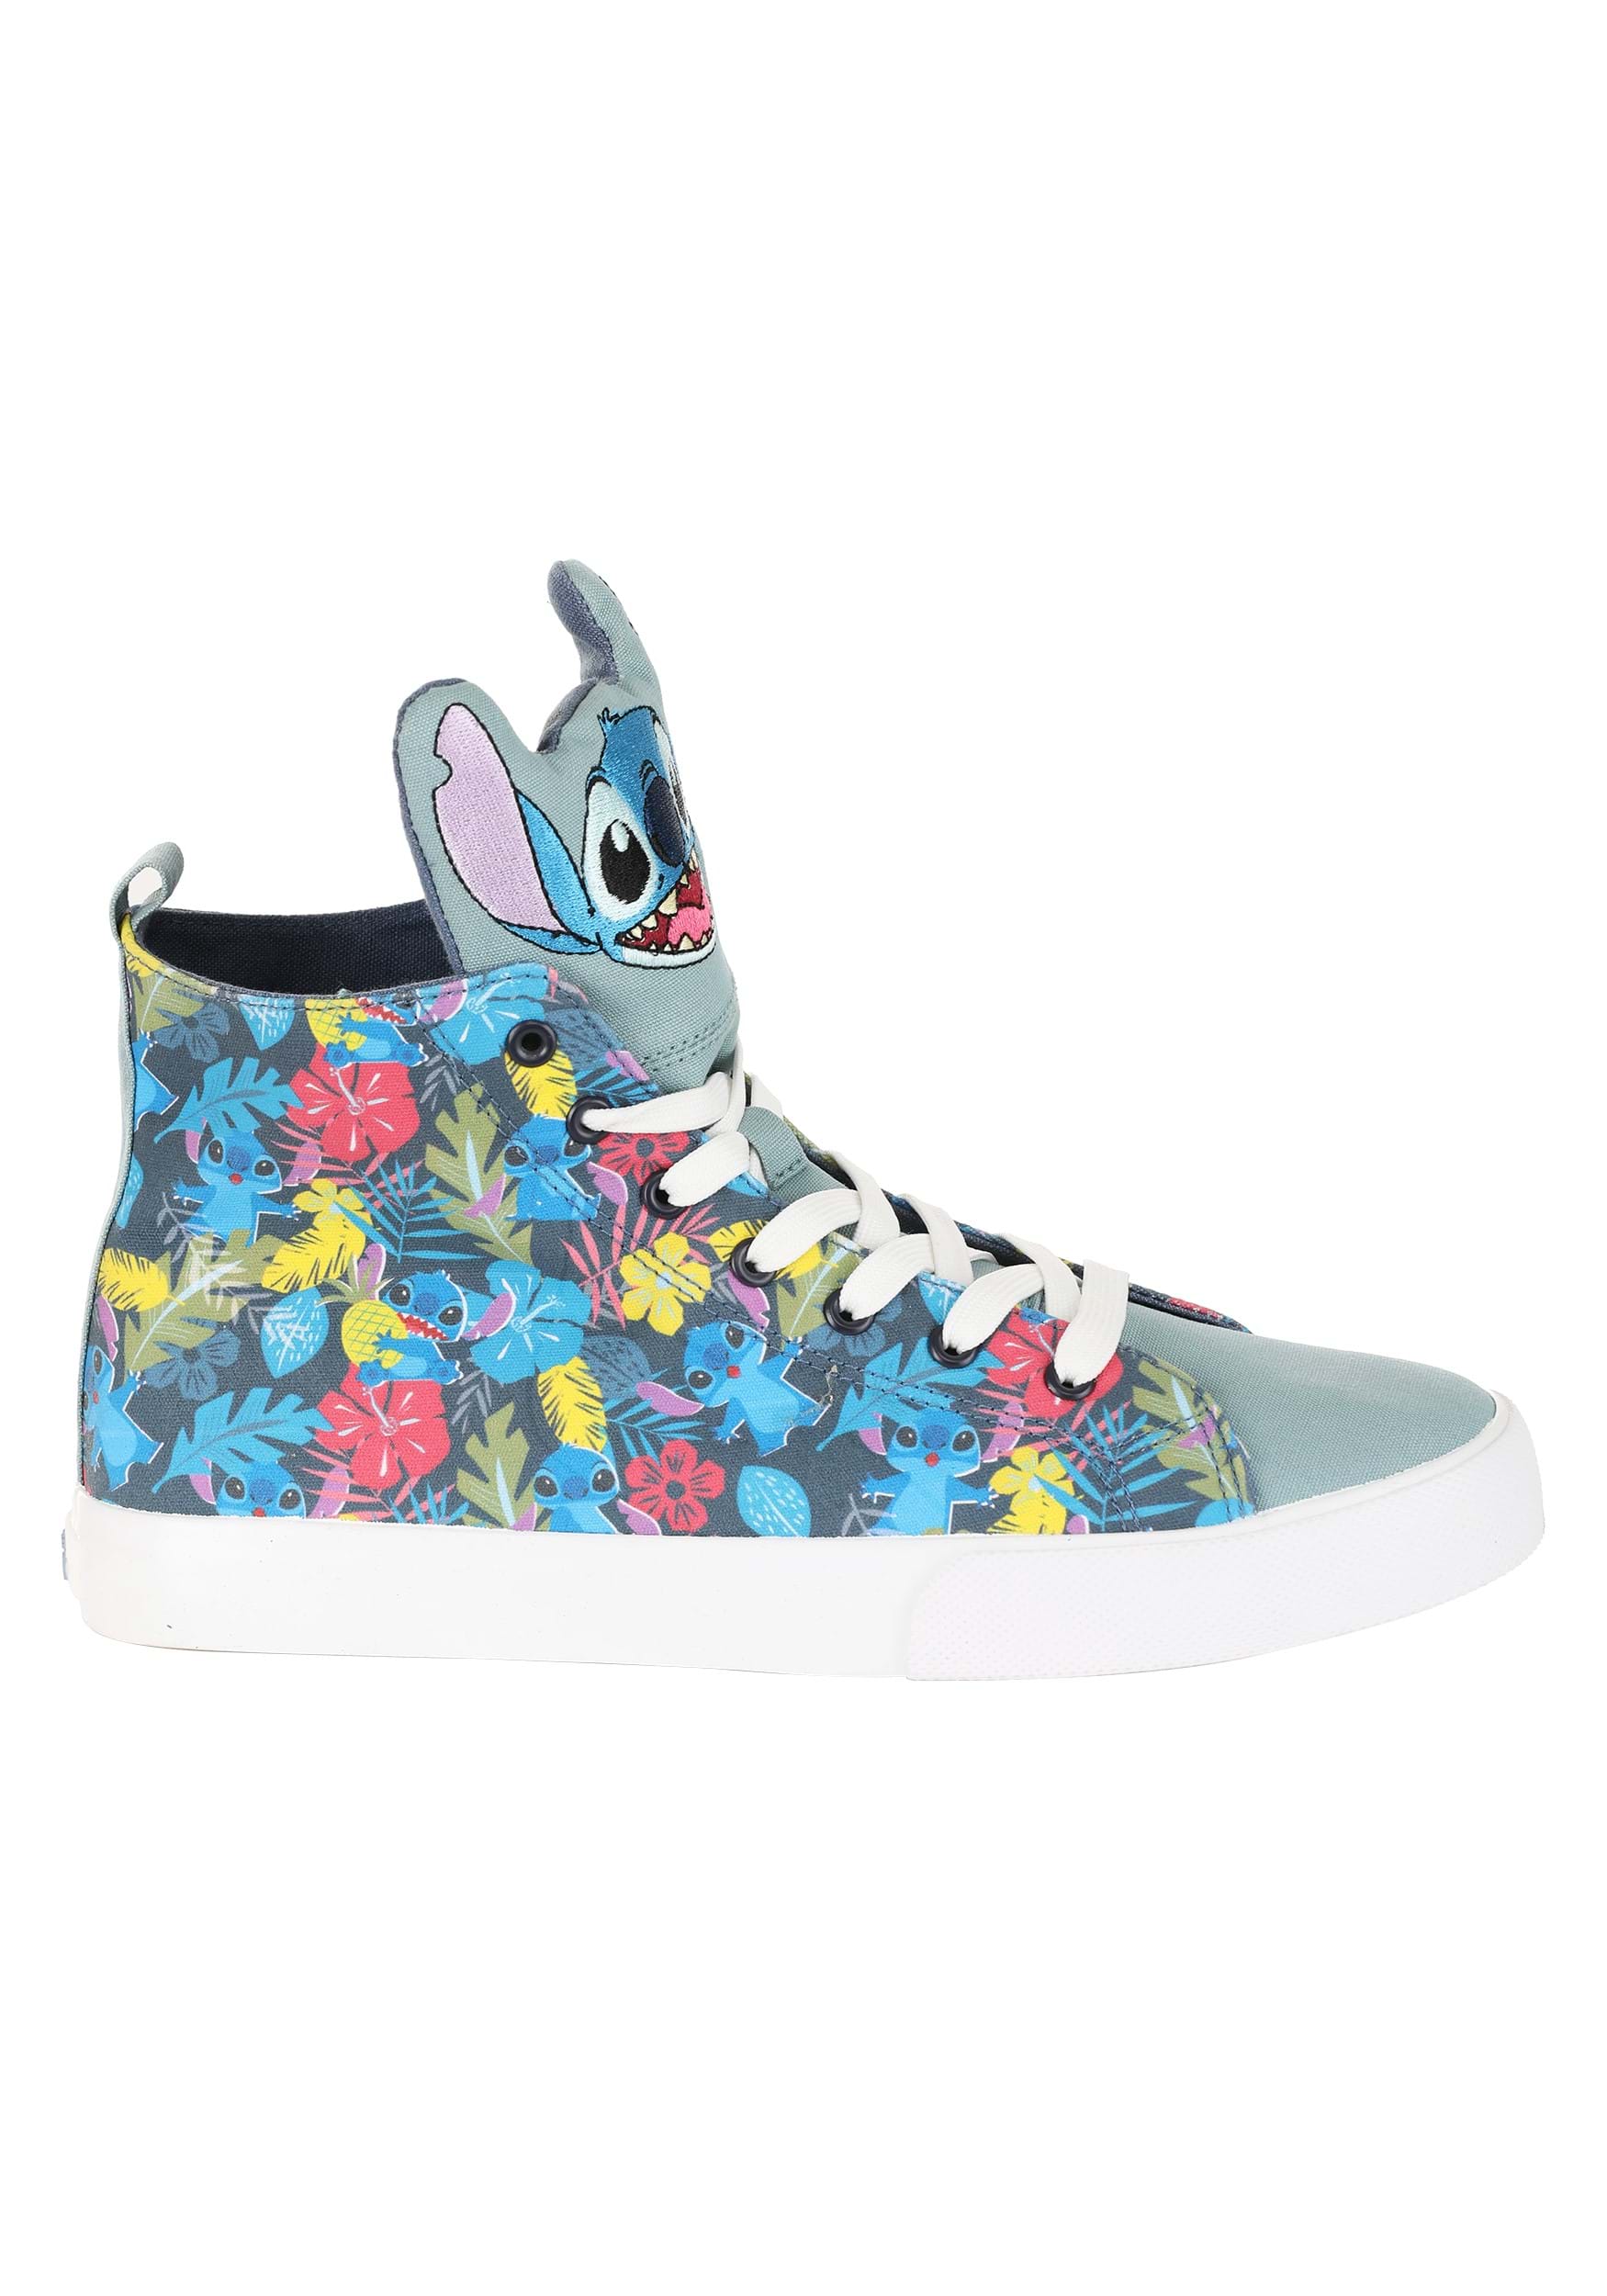 Unisex Lilo & Stitch High Top Sneakers